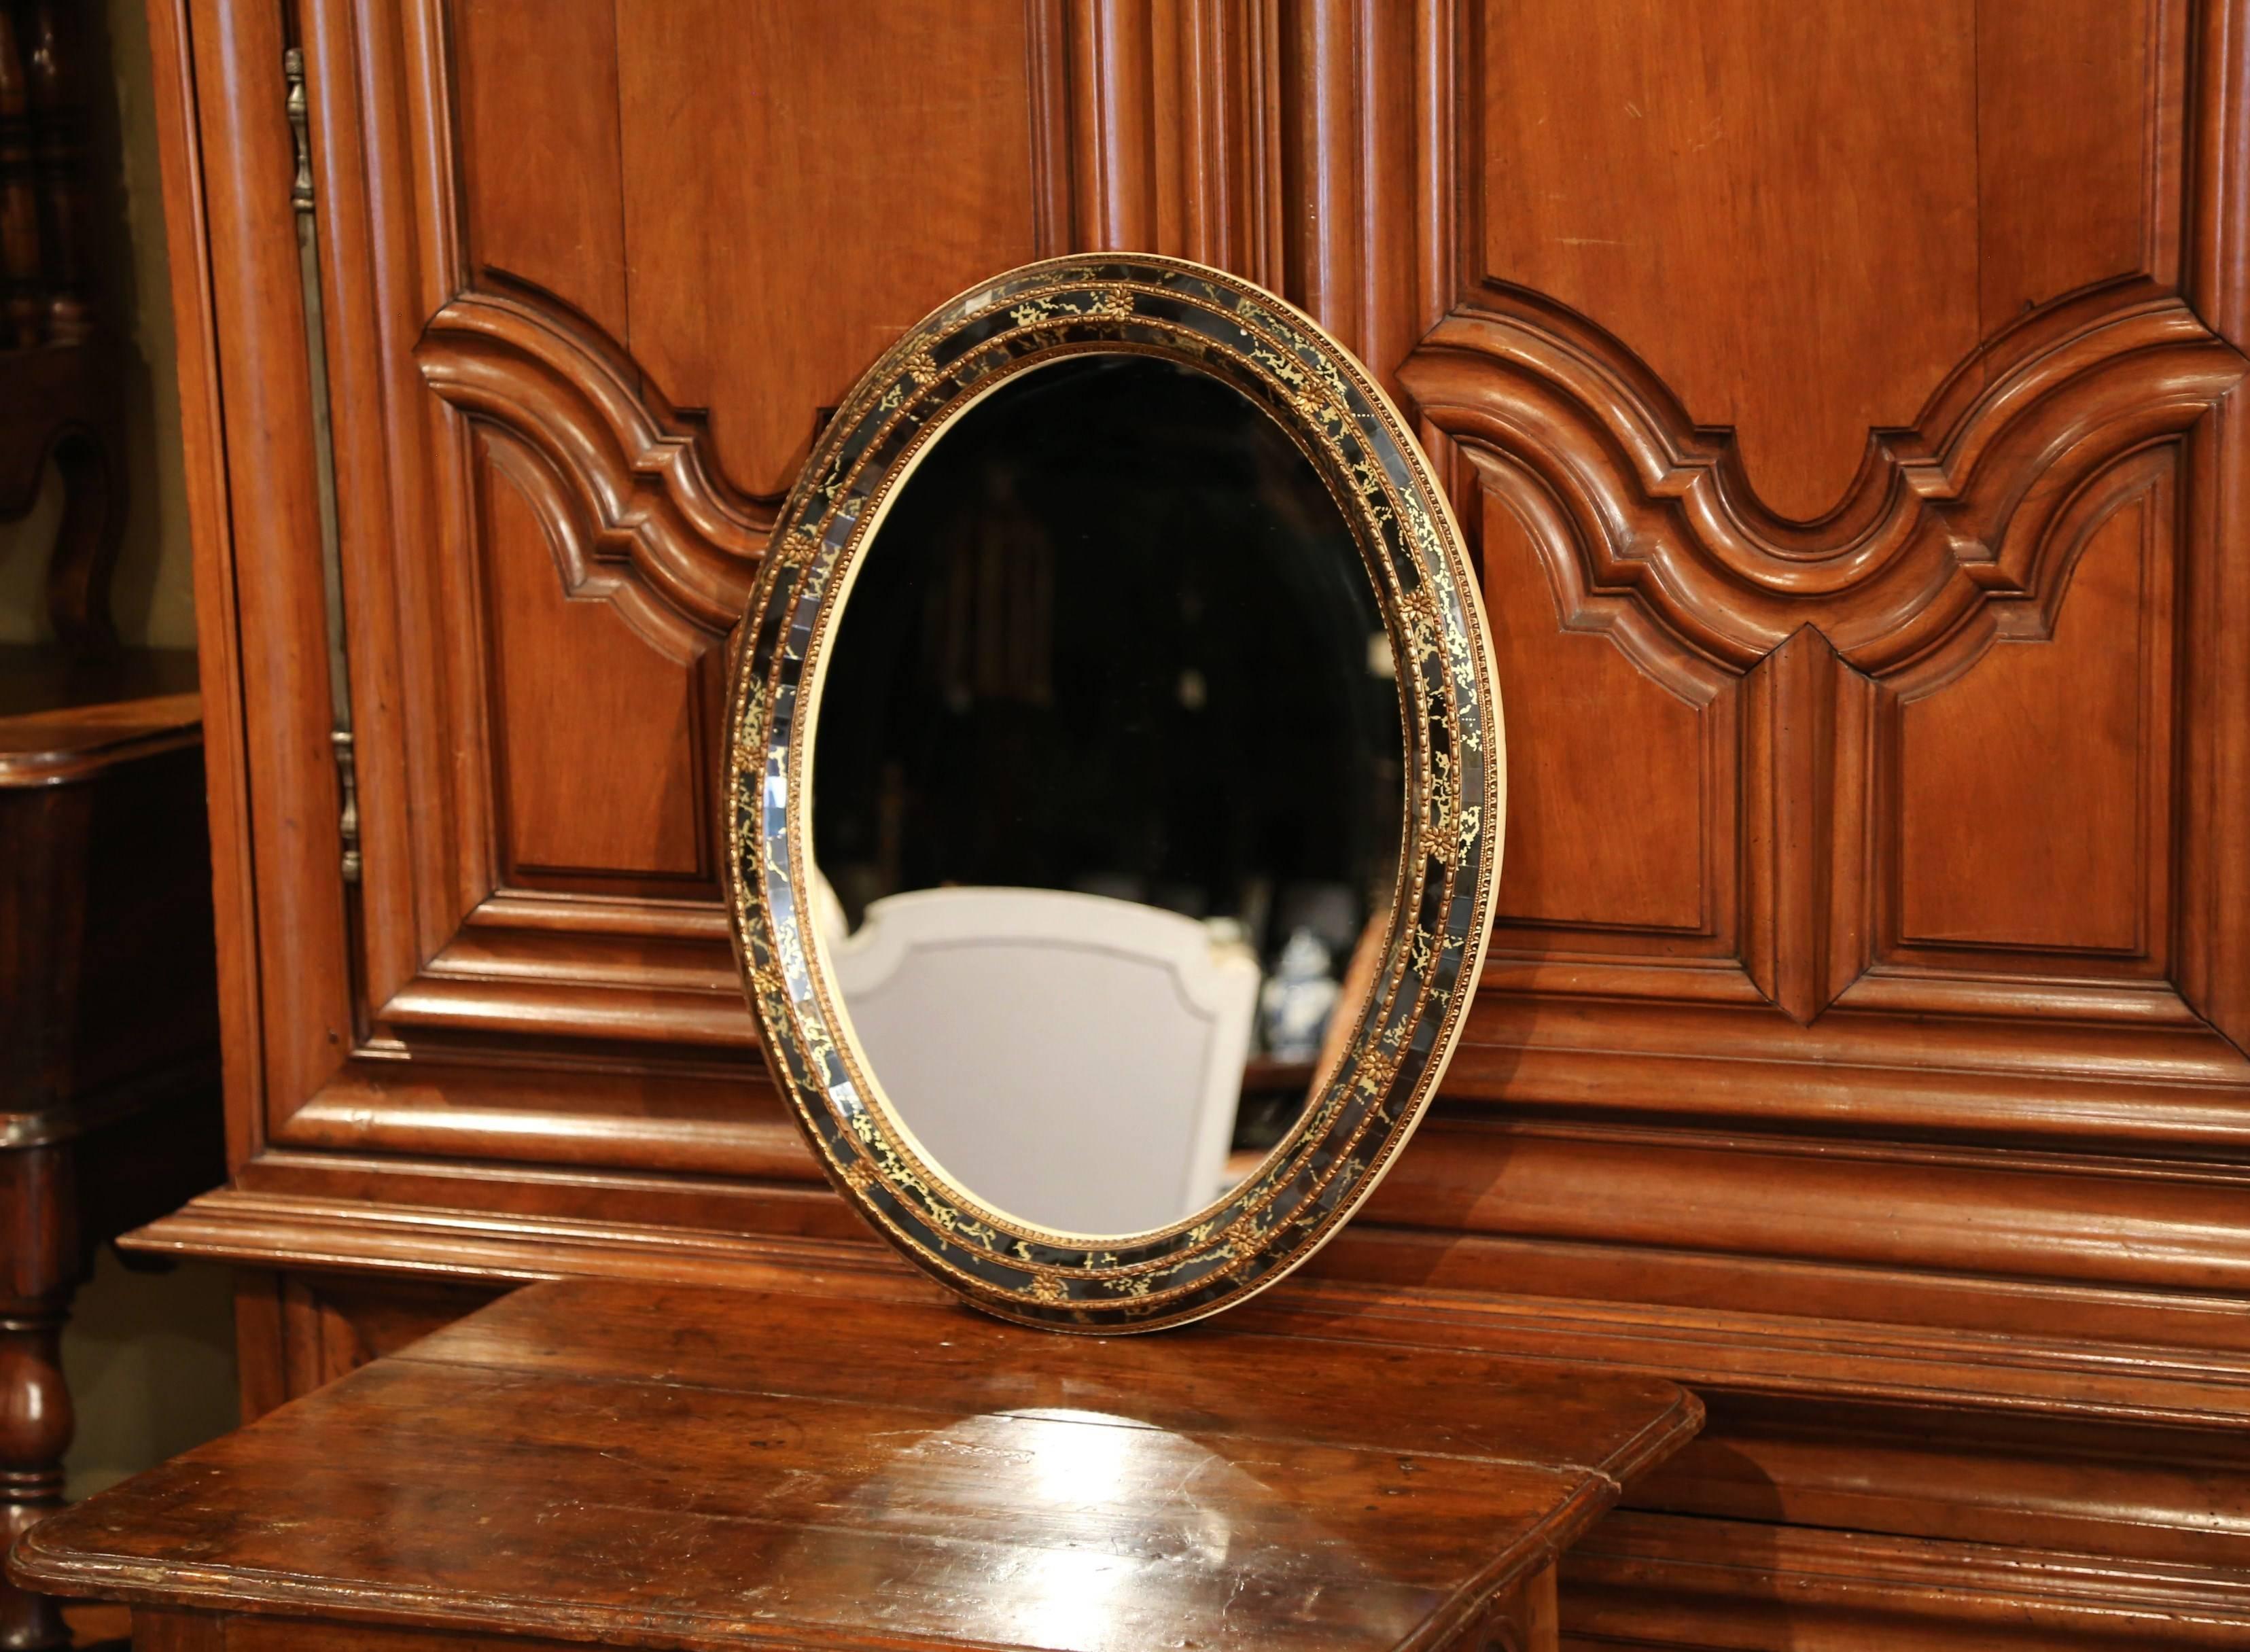 This antique wall mirror was created in Spain, circa 1950; it has a 